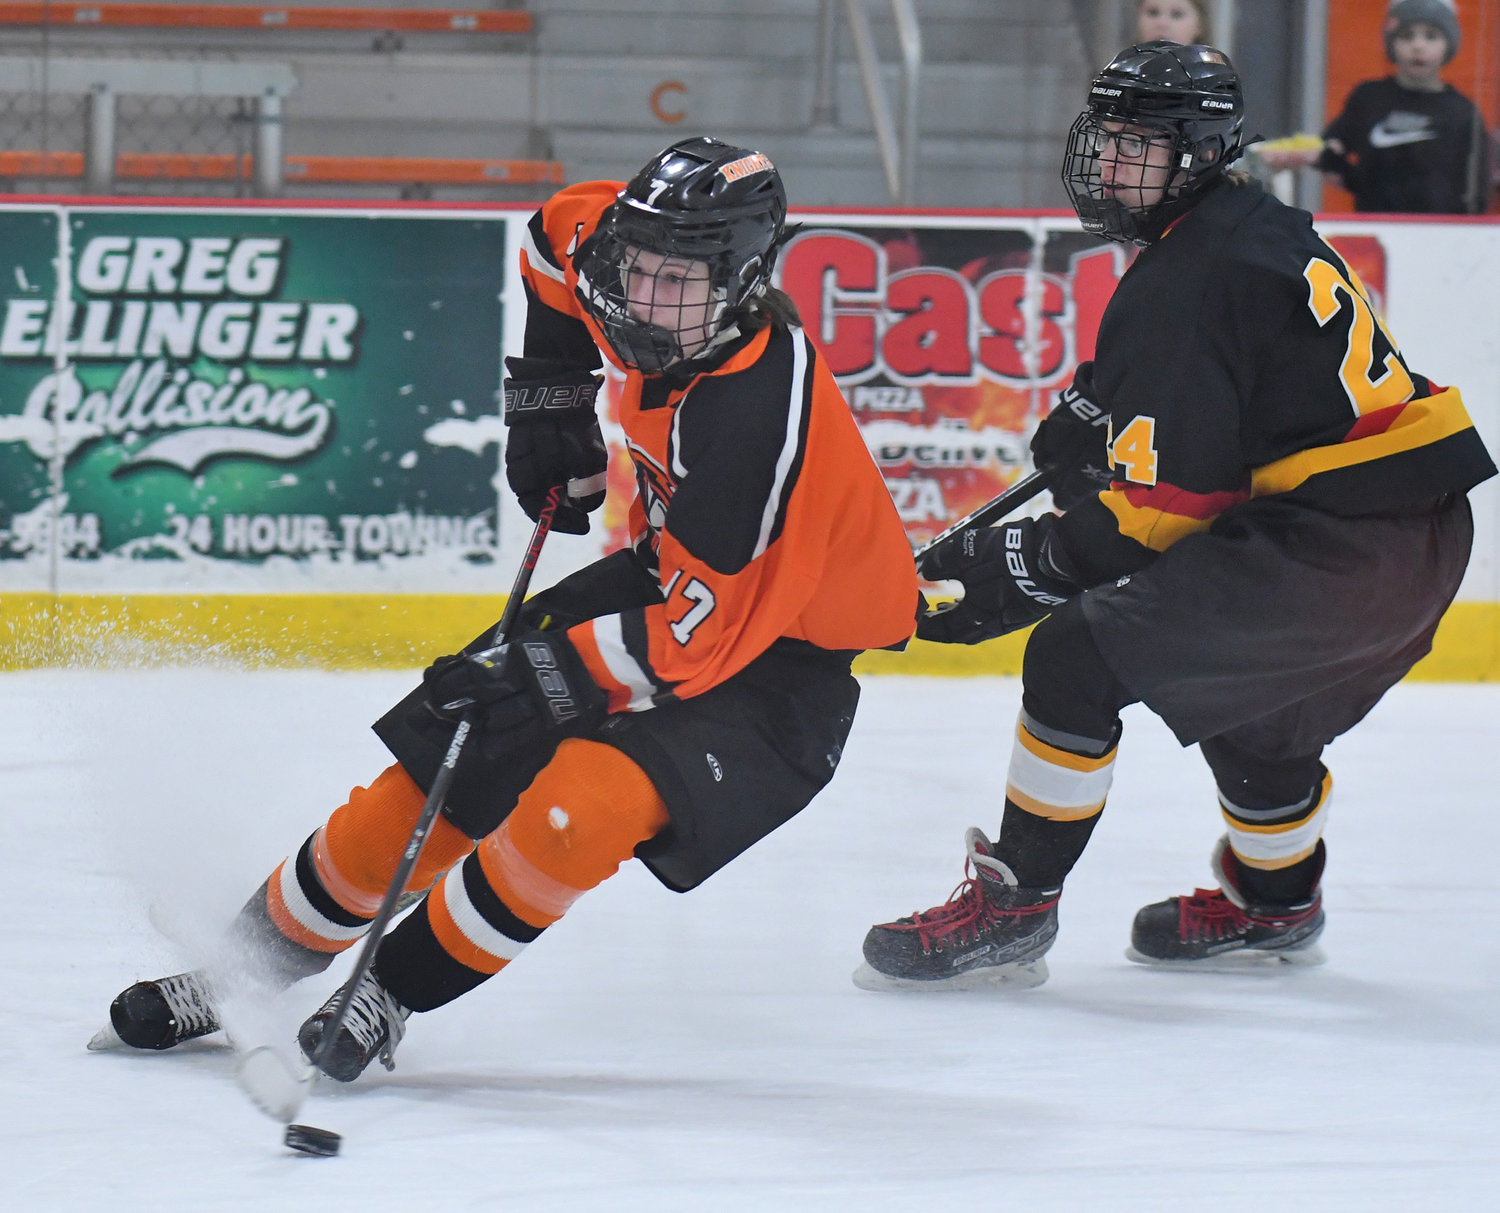 Rome Free Academy's Jimmy DeAngelo makes a quick cut with Ontario Bay's Bradyn Walker in pursuit in the first period Tuesday night at Kennedy Arena. RFA lost 5-4 in overtime.